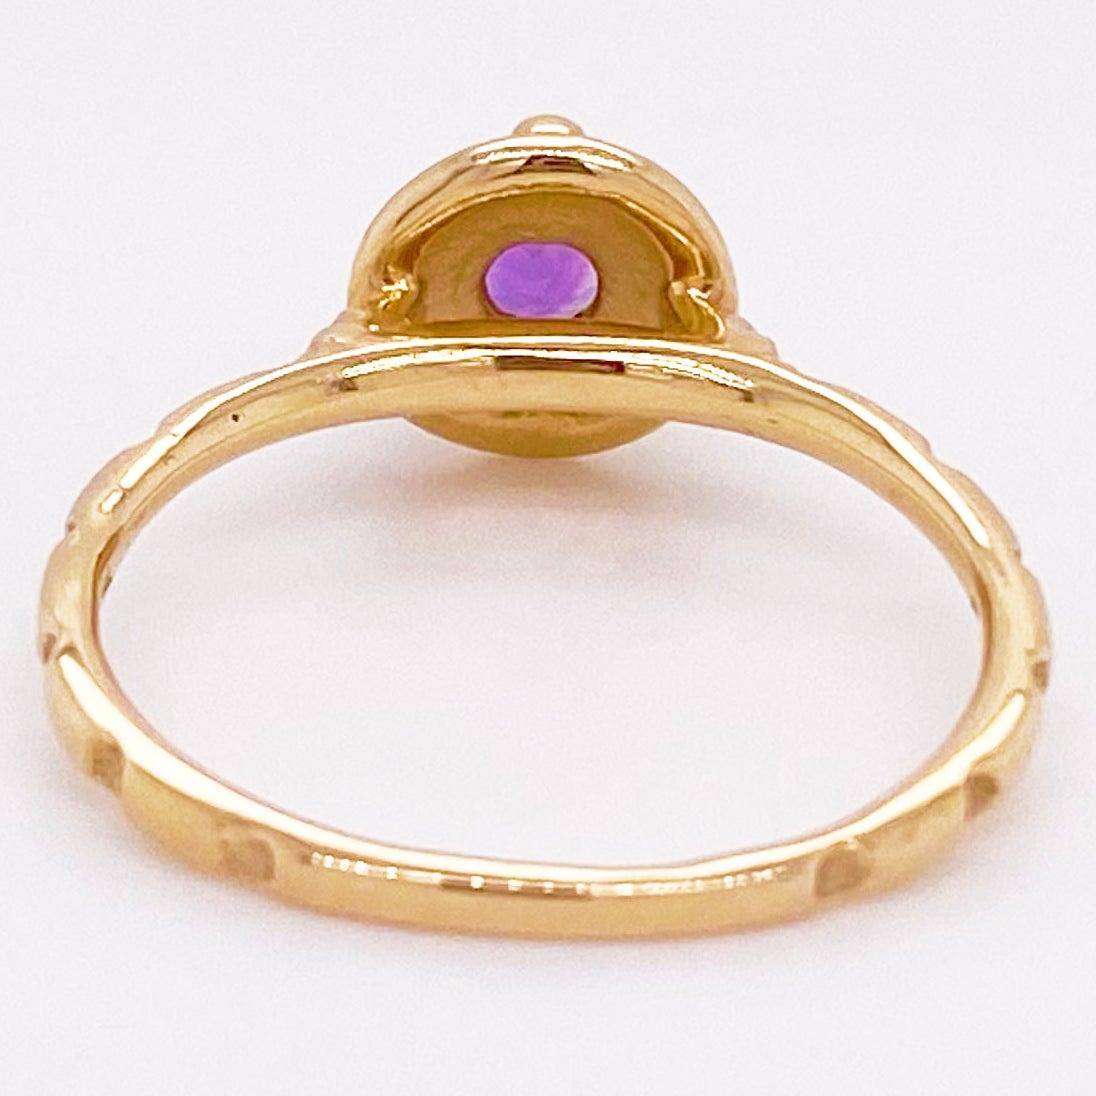 For Sale:  Amethyst Solitaire Ring, Yellow Gold, Round, Purple, Stackable, Bezel, February 5